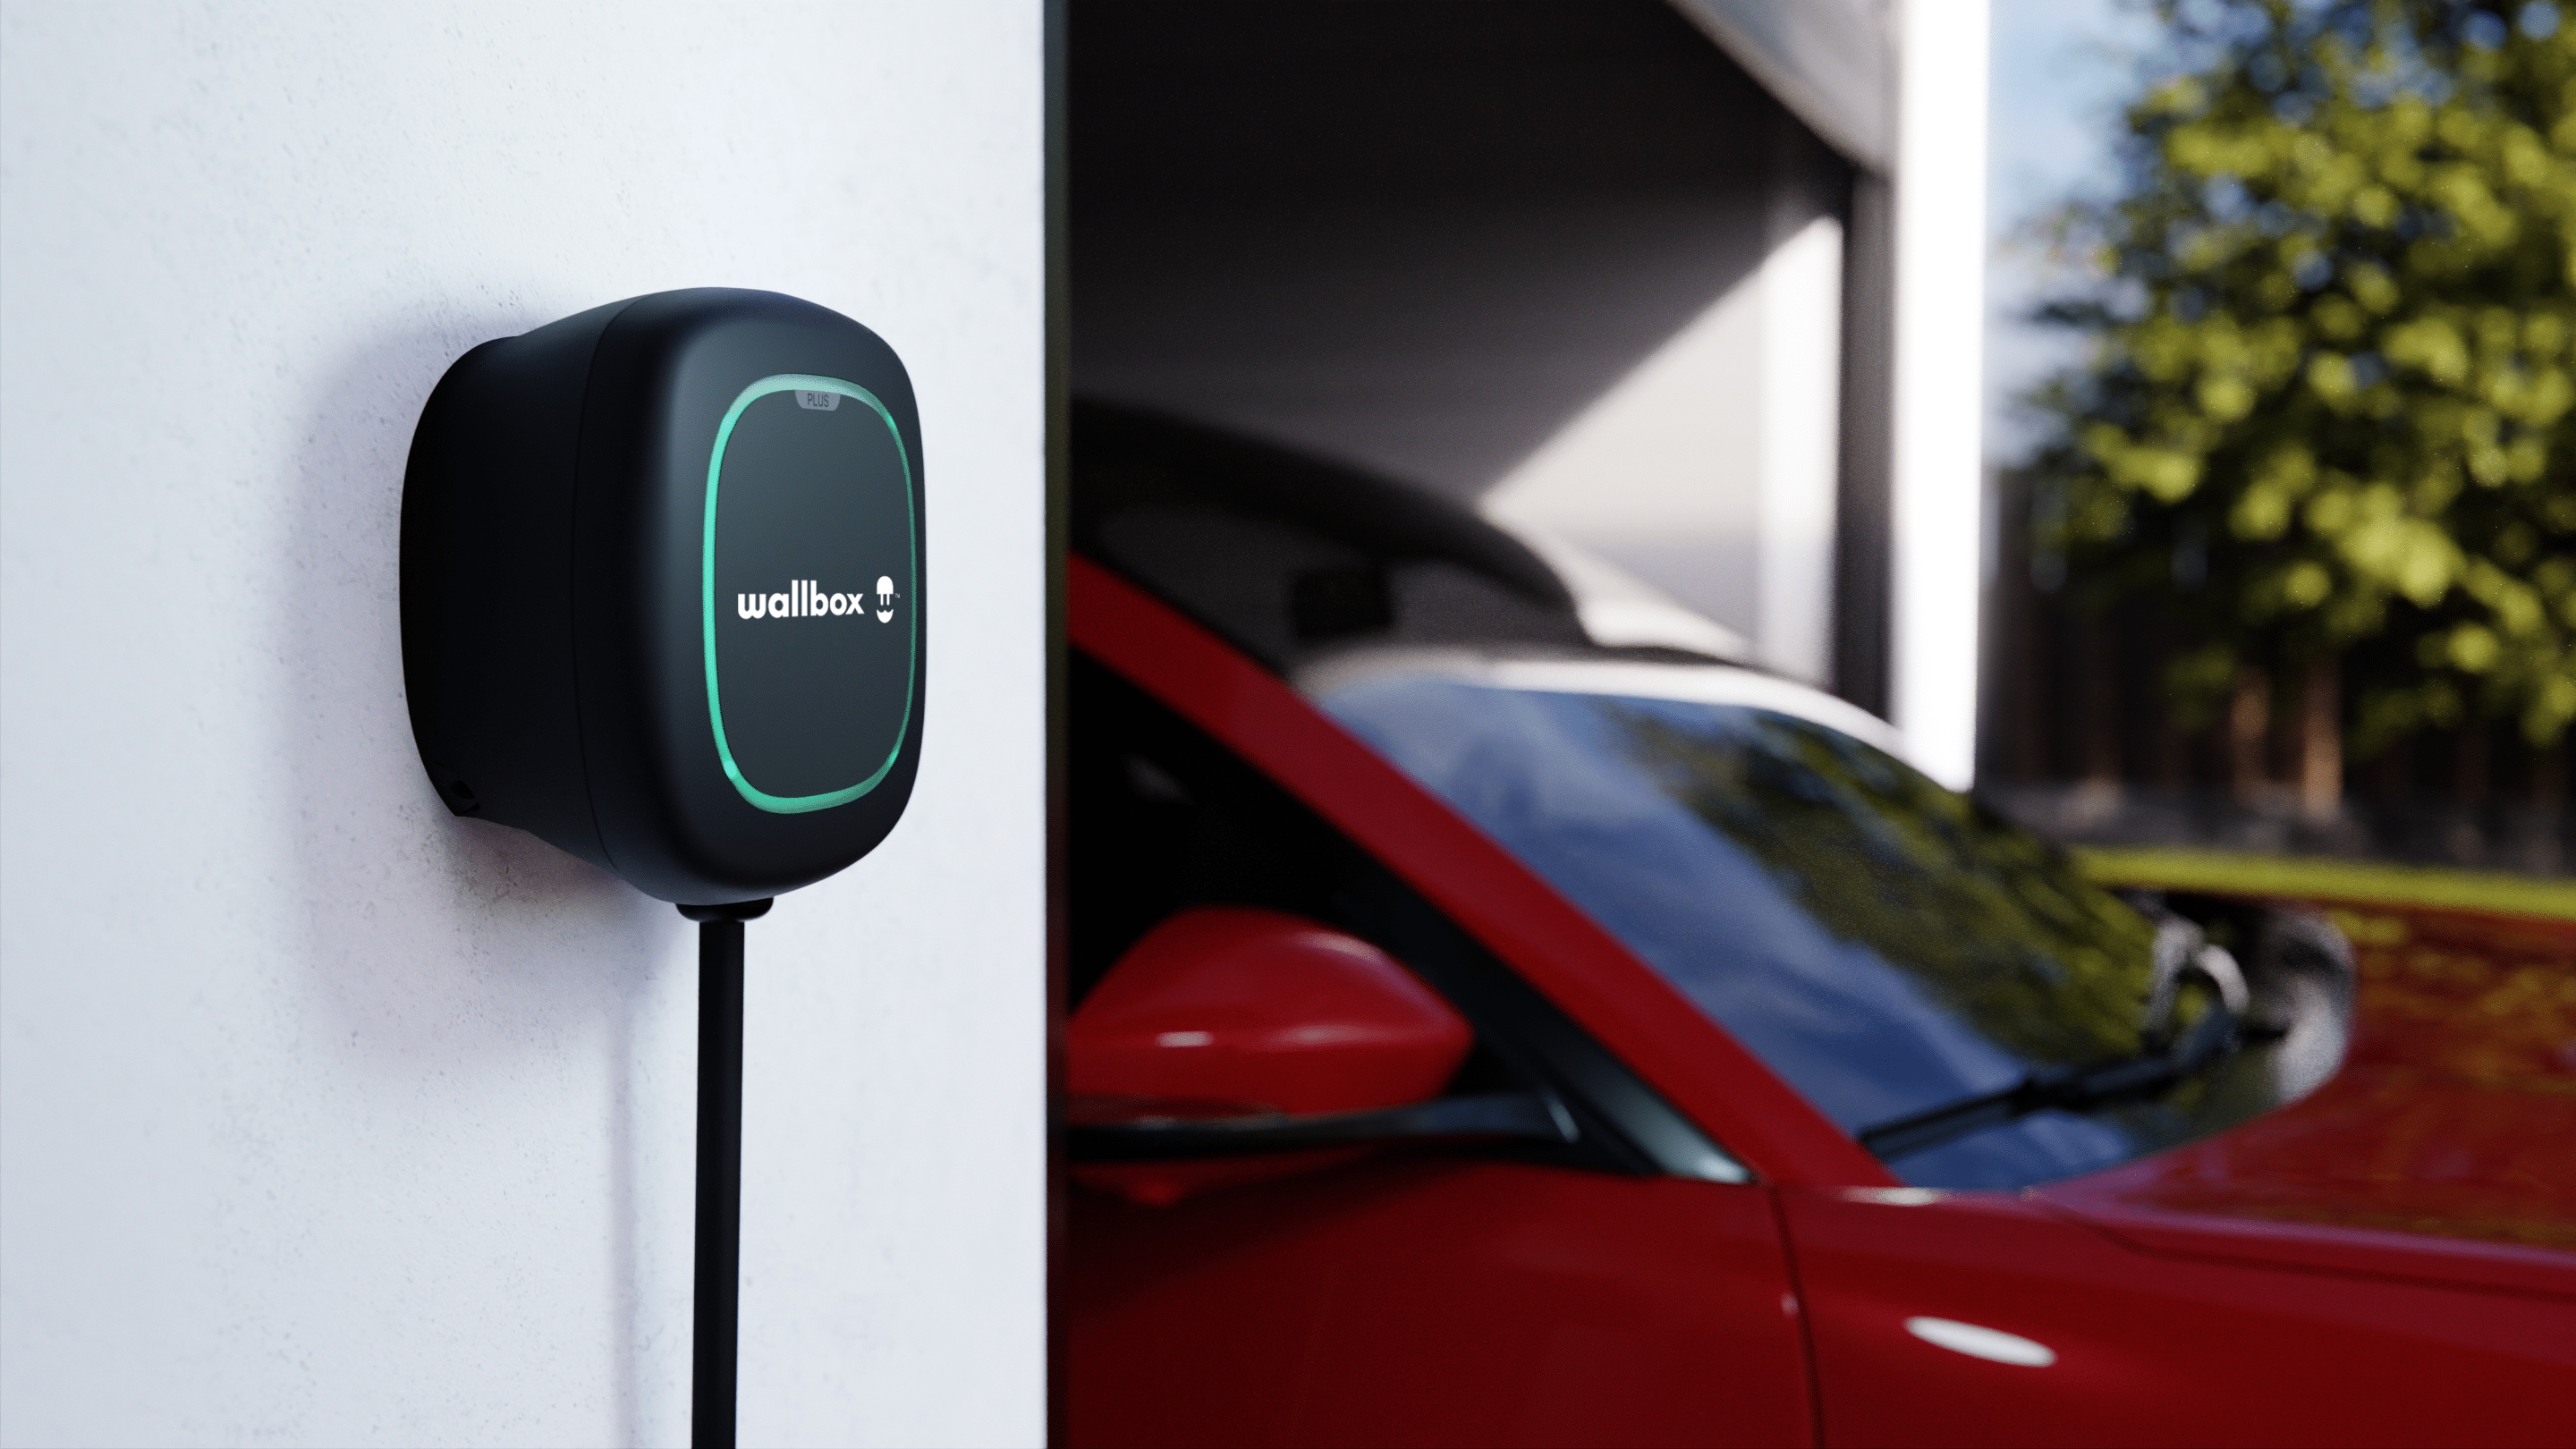 Pulsar Plus Level 2 Electric Vehicle Smart Charger 48 Amp Hardwired Ultra Compact